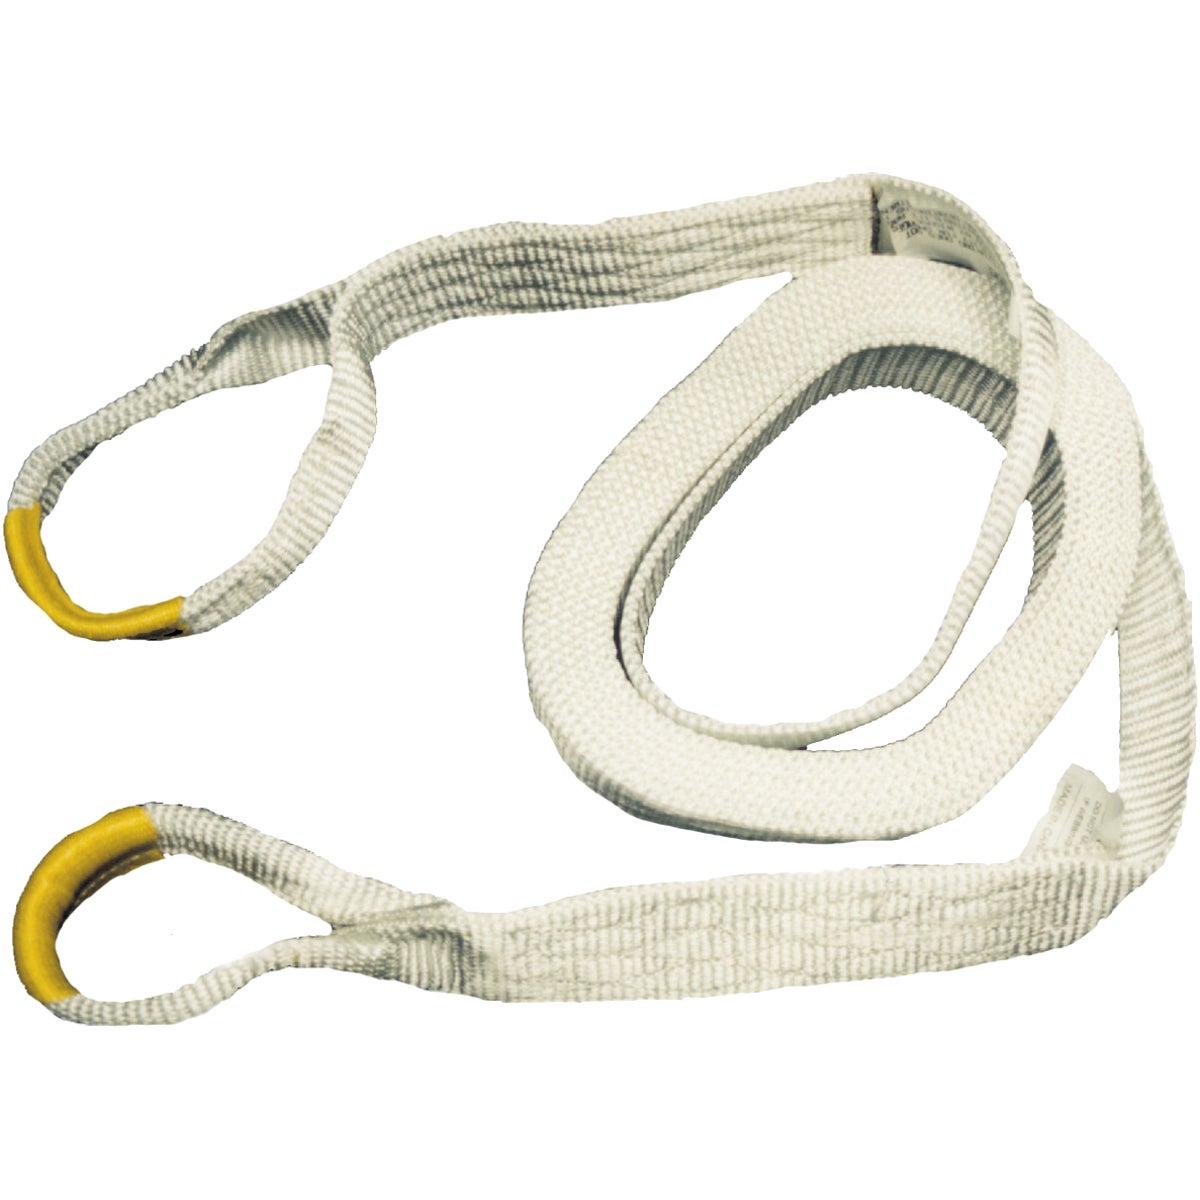 Erickson 2 In. x 30 Ft. 9000 Lb. Polyester Recovery Tow Strap, White